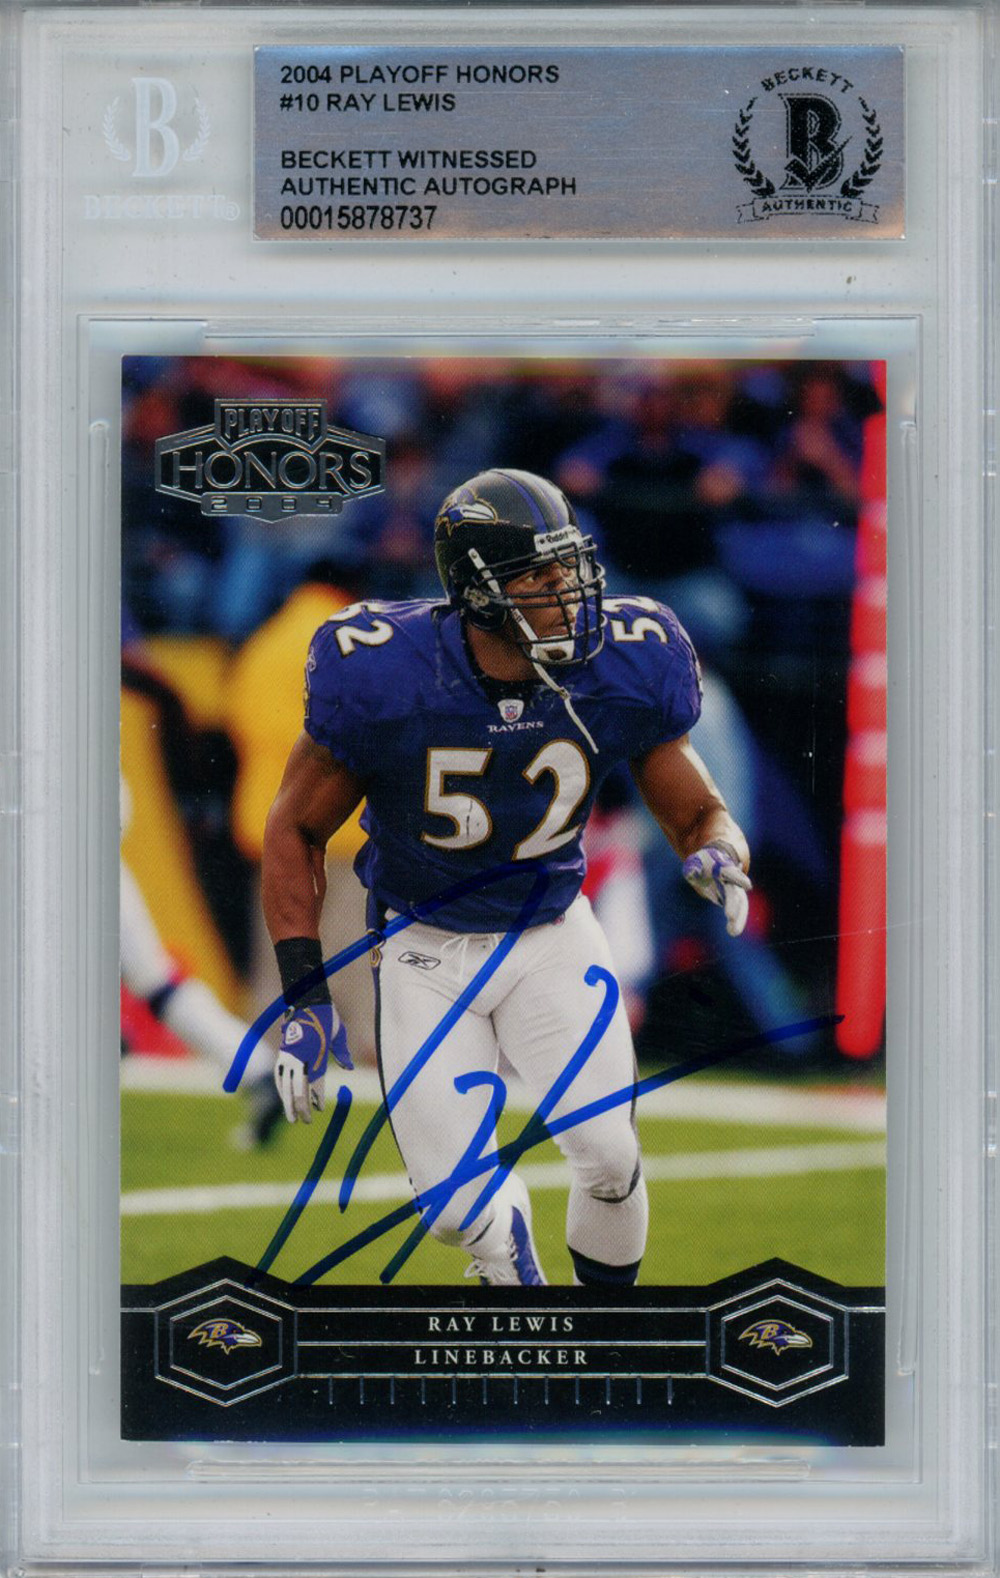 Ray Lewis Autographed 2004 Playoff Honors #10 Trading Card Beckett Slab